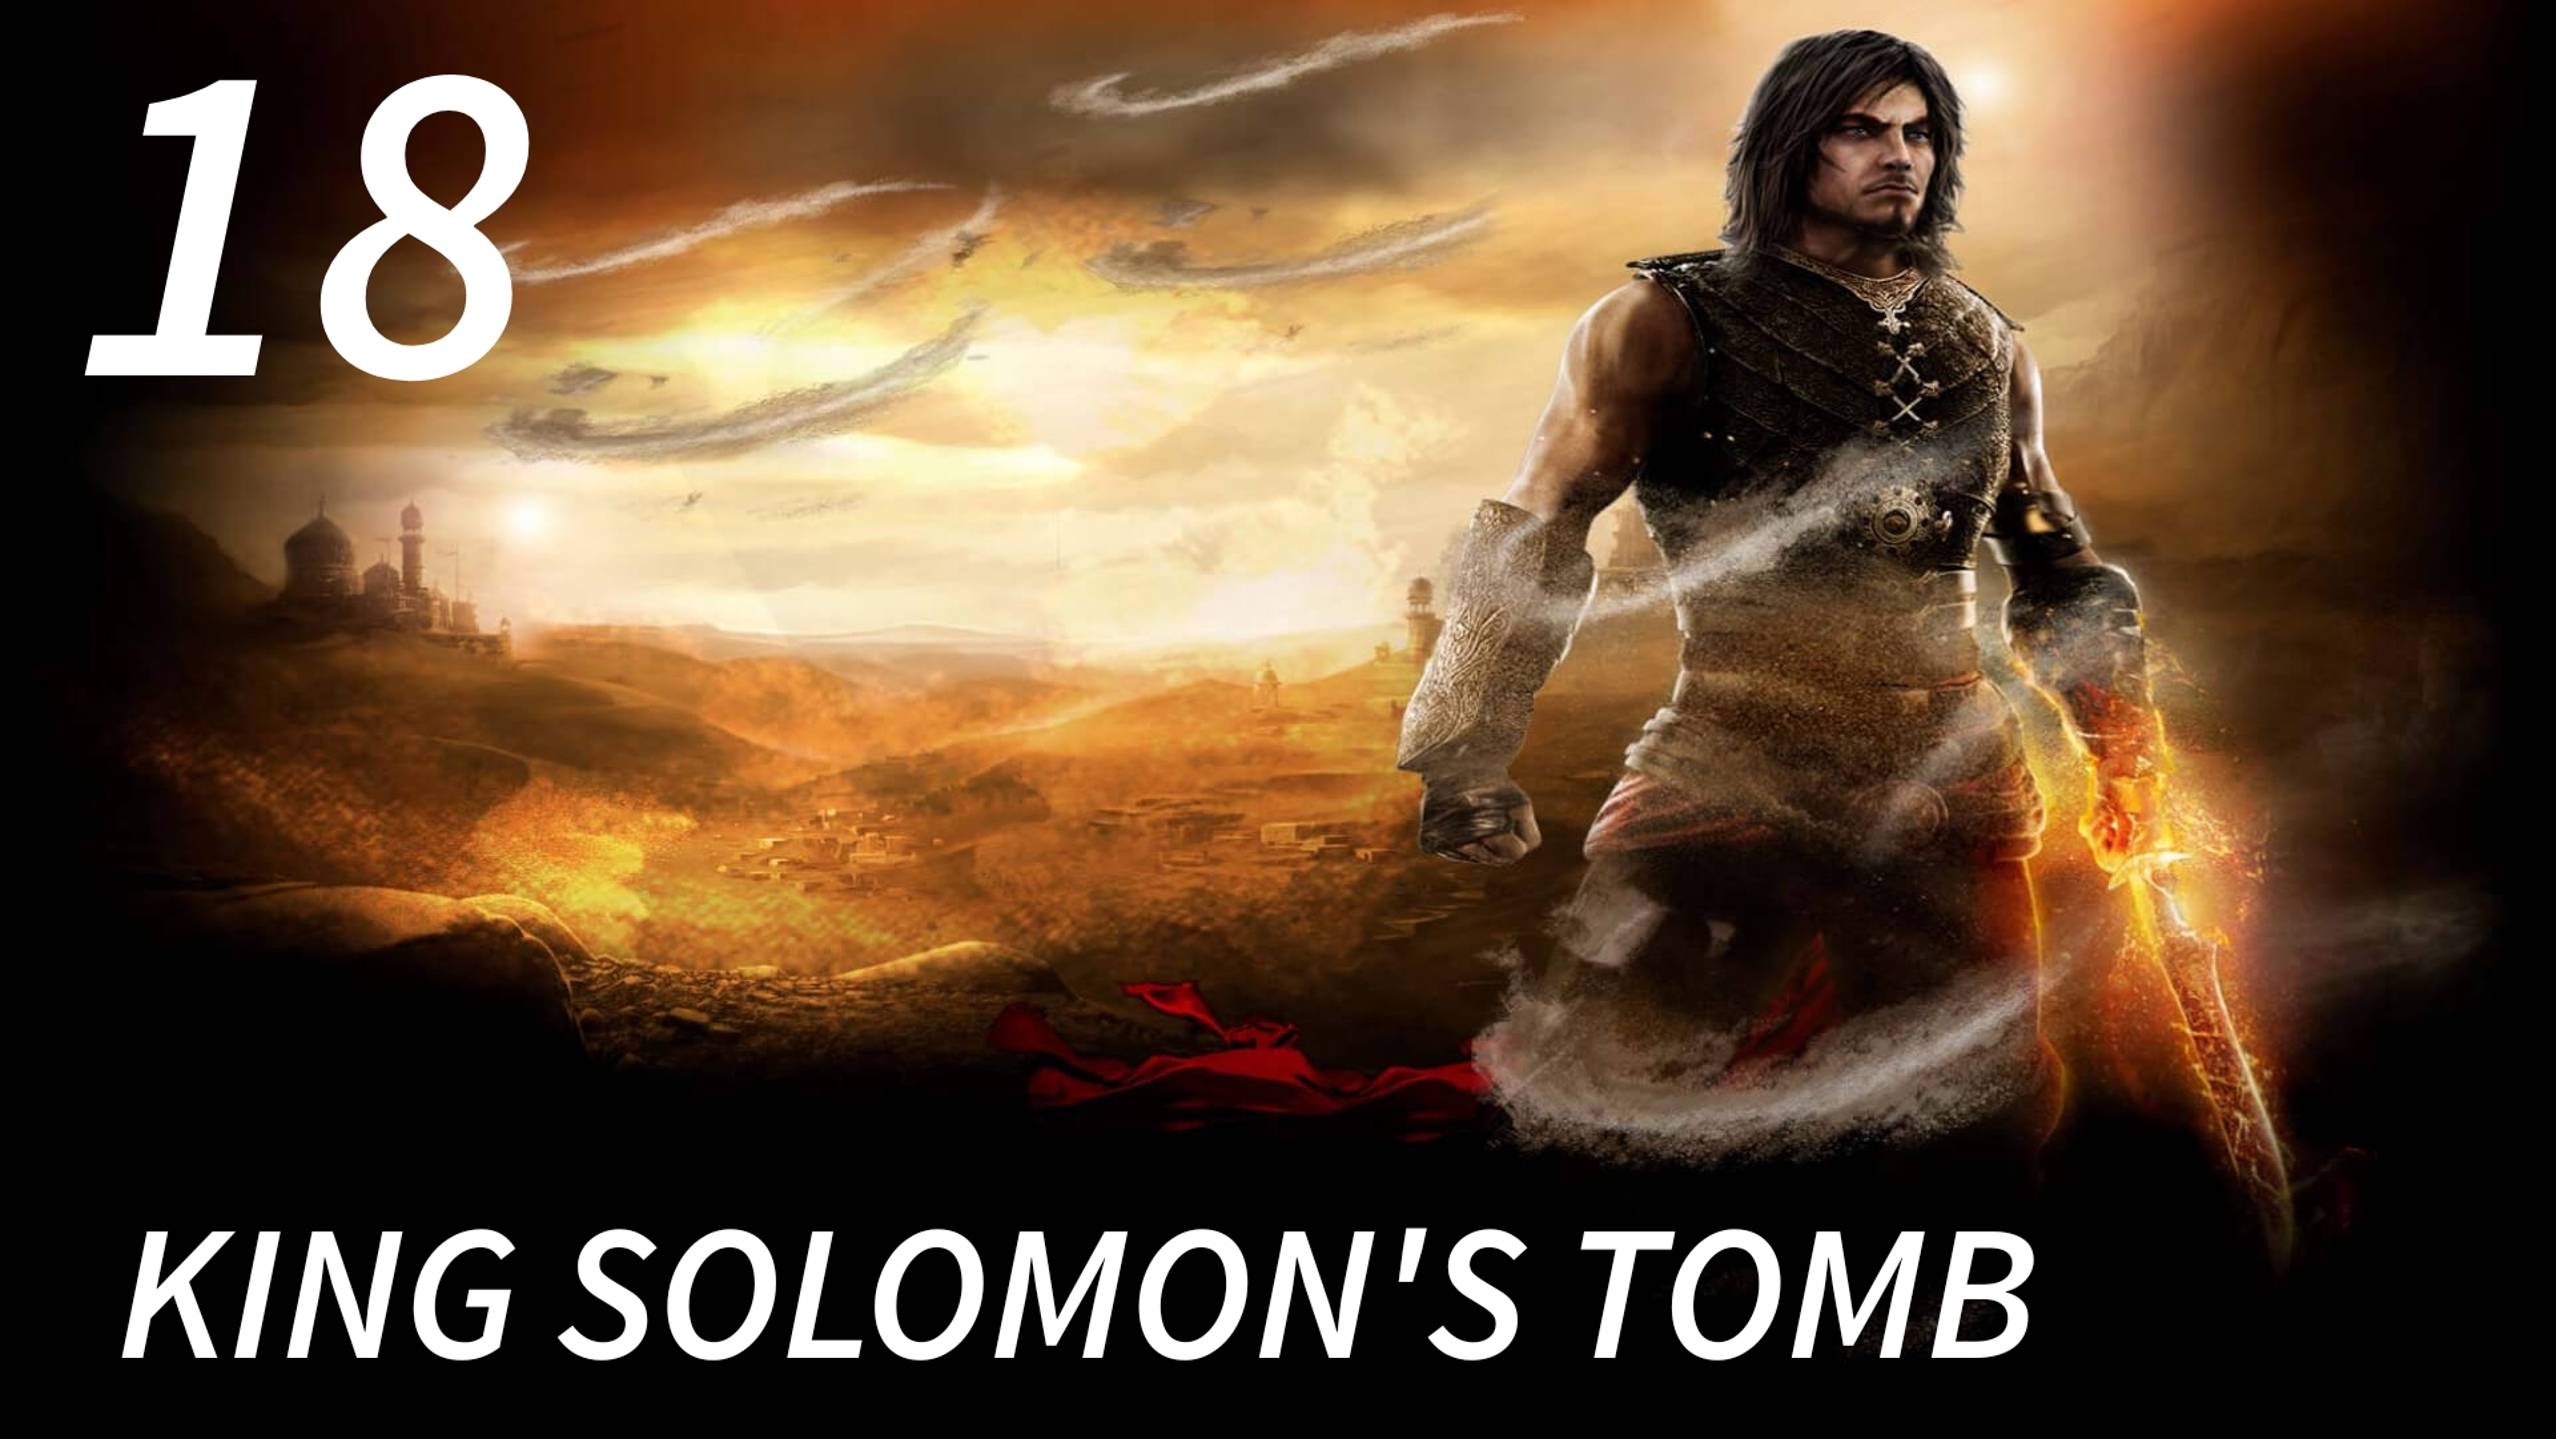 Prince of Persia: The Forgotten Sands / King Solomon's Tomb